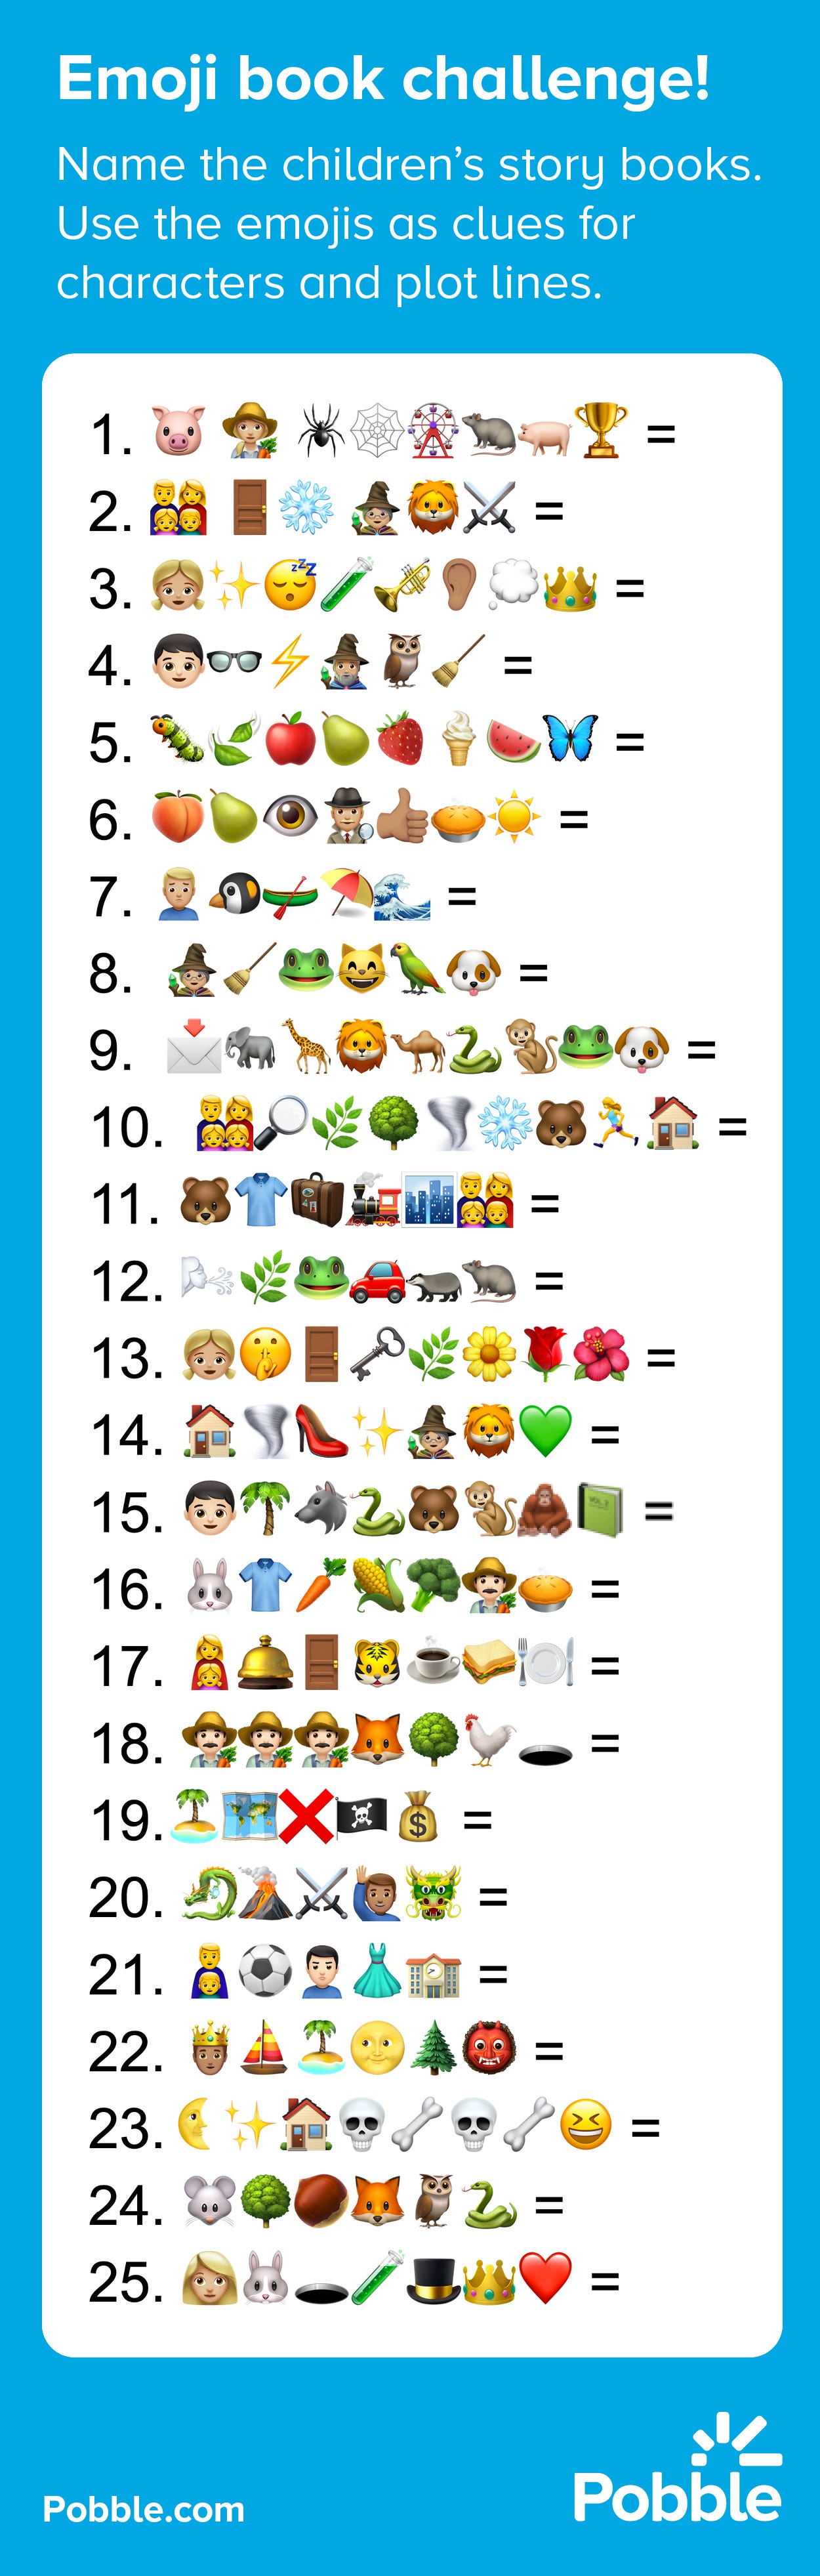 The Emoji Challenge Hey Folks Ready For A Challenge Can By Anna Whiteley Pobble Medium